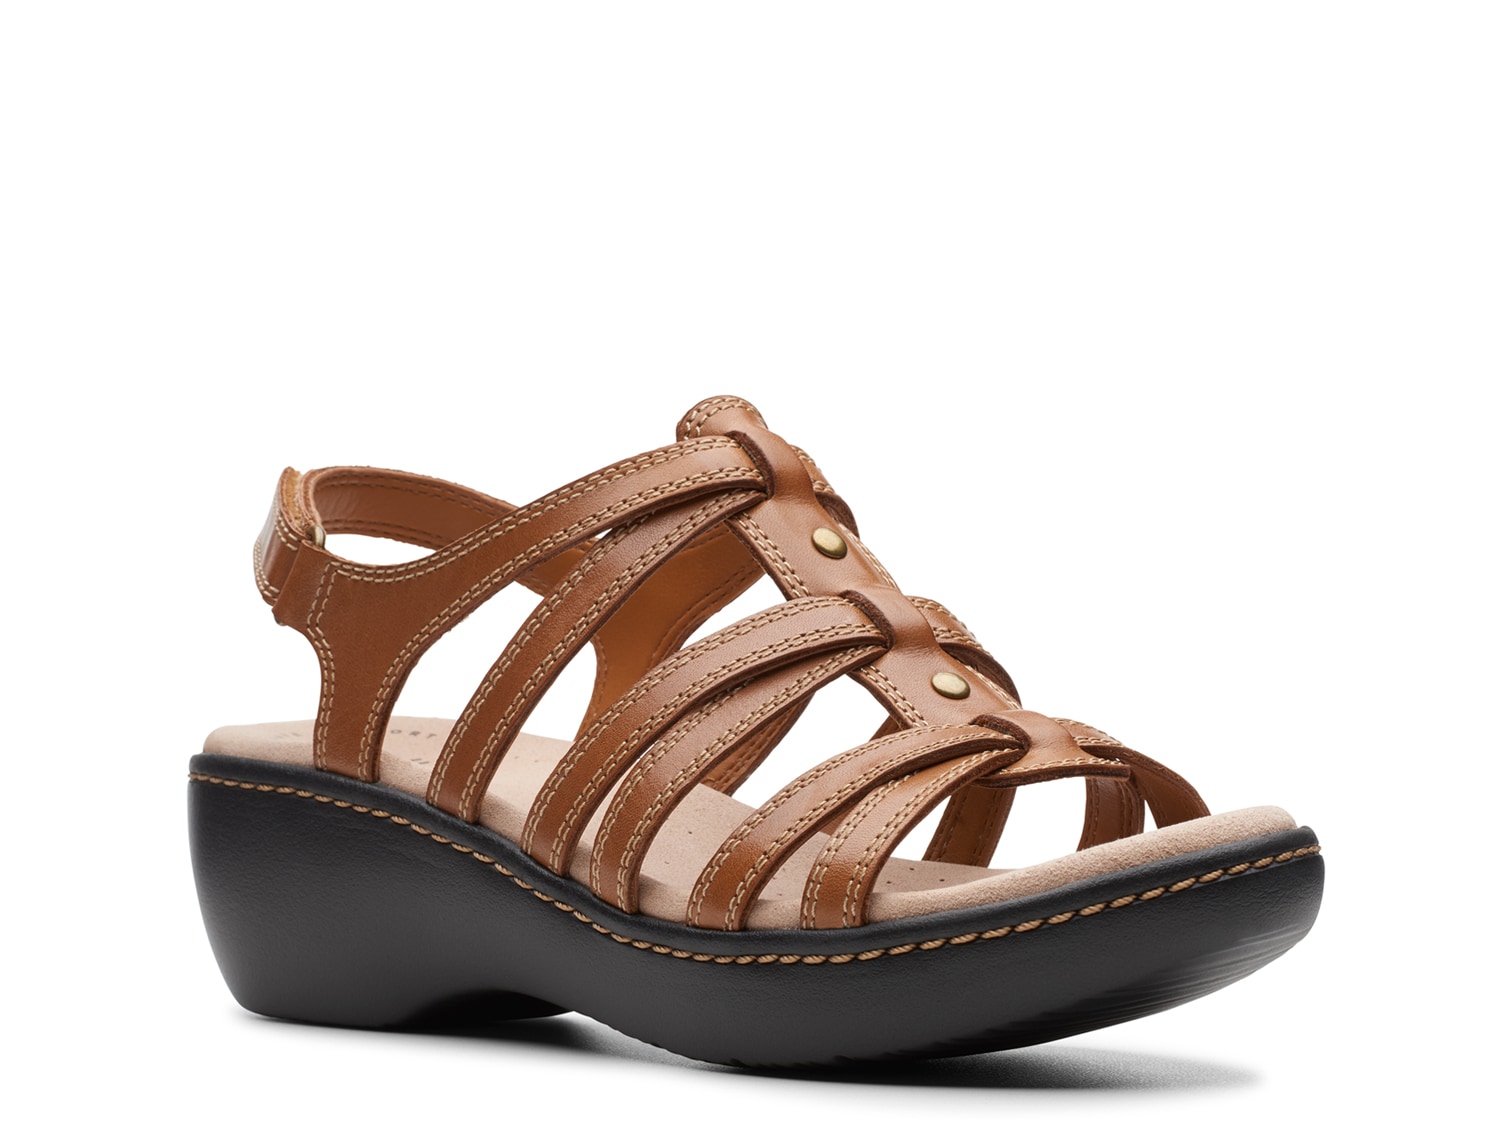 Clarks Delana Curve Wedge Sandal - Free Shipping | DSW